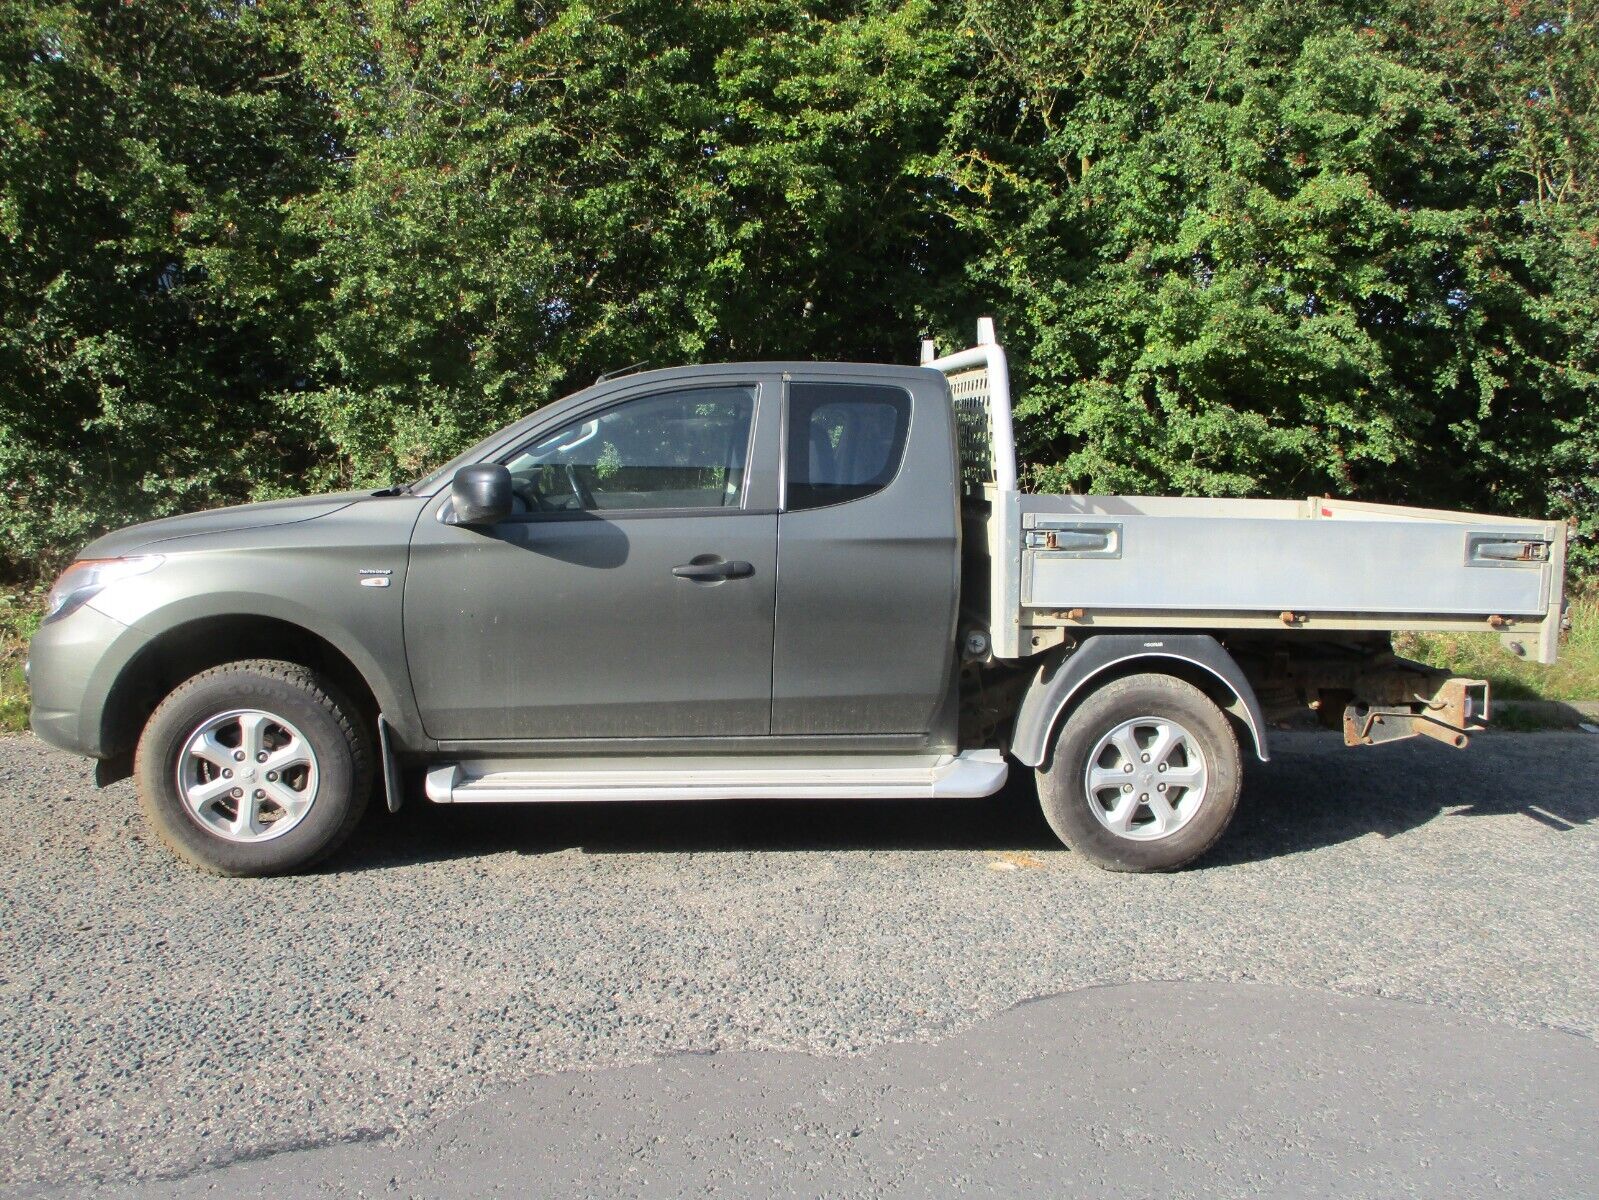 Bid on 40K MILES ONLY : MITSUBISHI L200 KINGCAB 4X4 TIPPER 2.5 DI-D- Buy &amp; Sell on Auction with EAMA Group